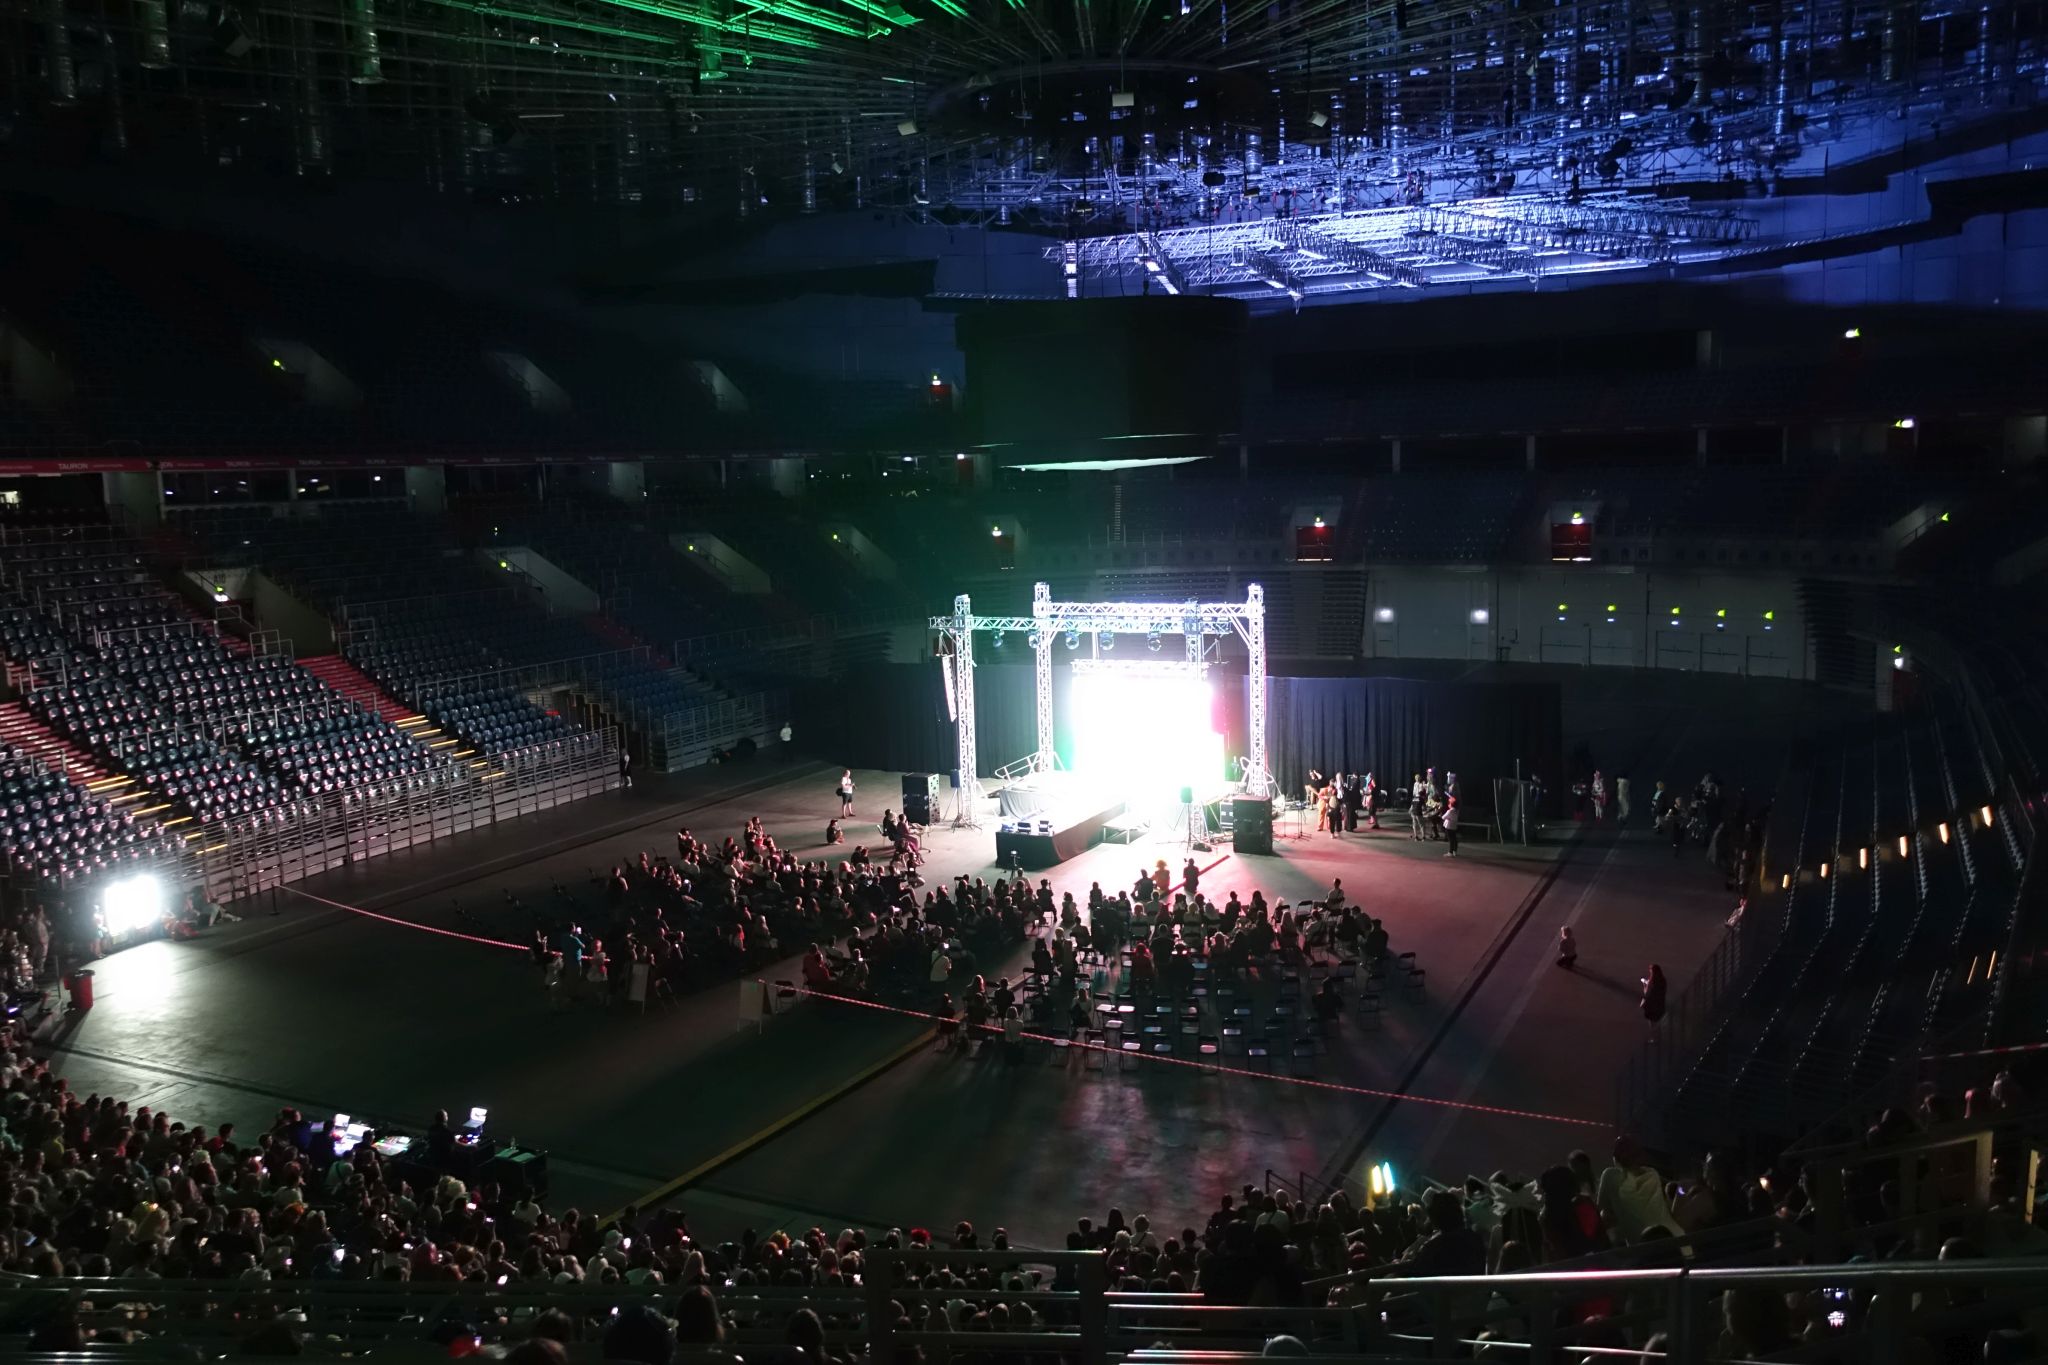 A picture showing a stage surrounded by the stands. On the stage there is a big and very bright screen.